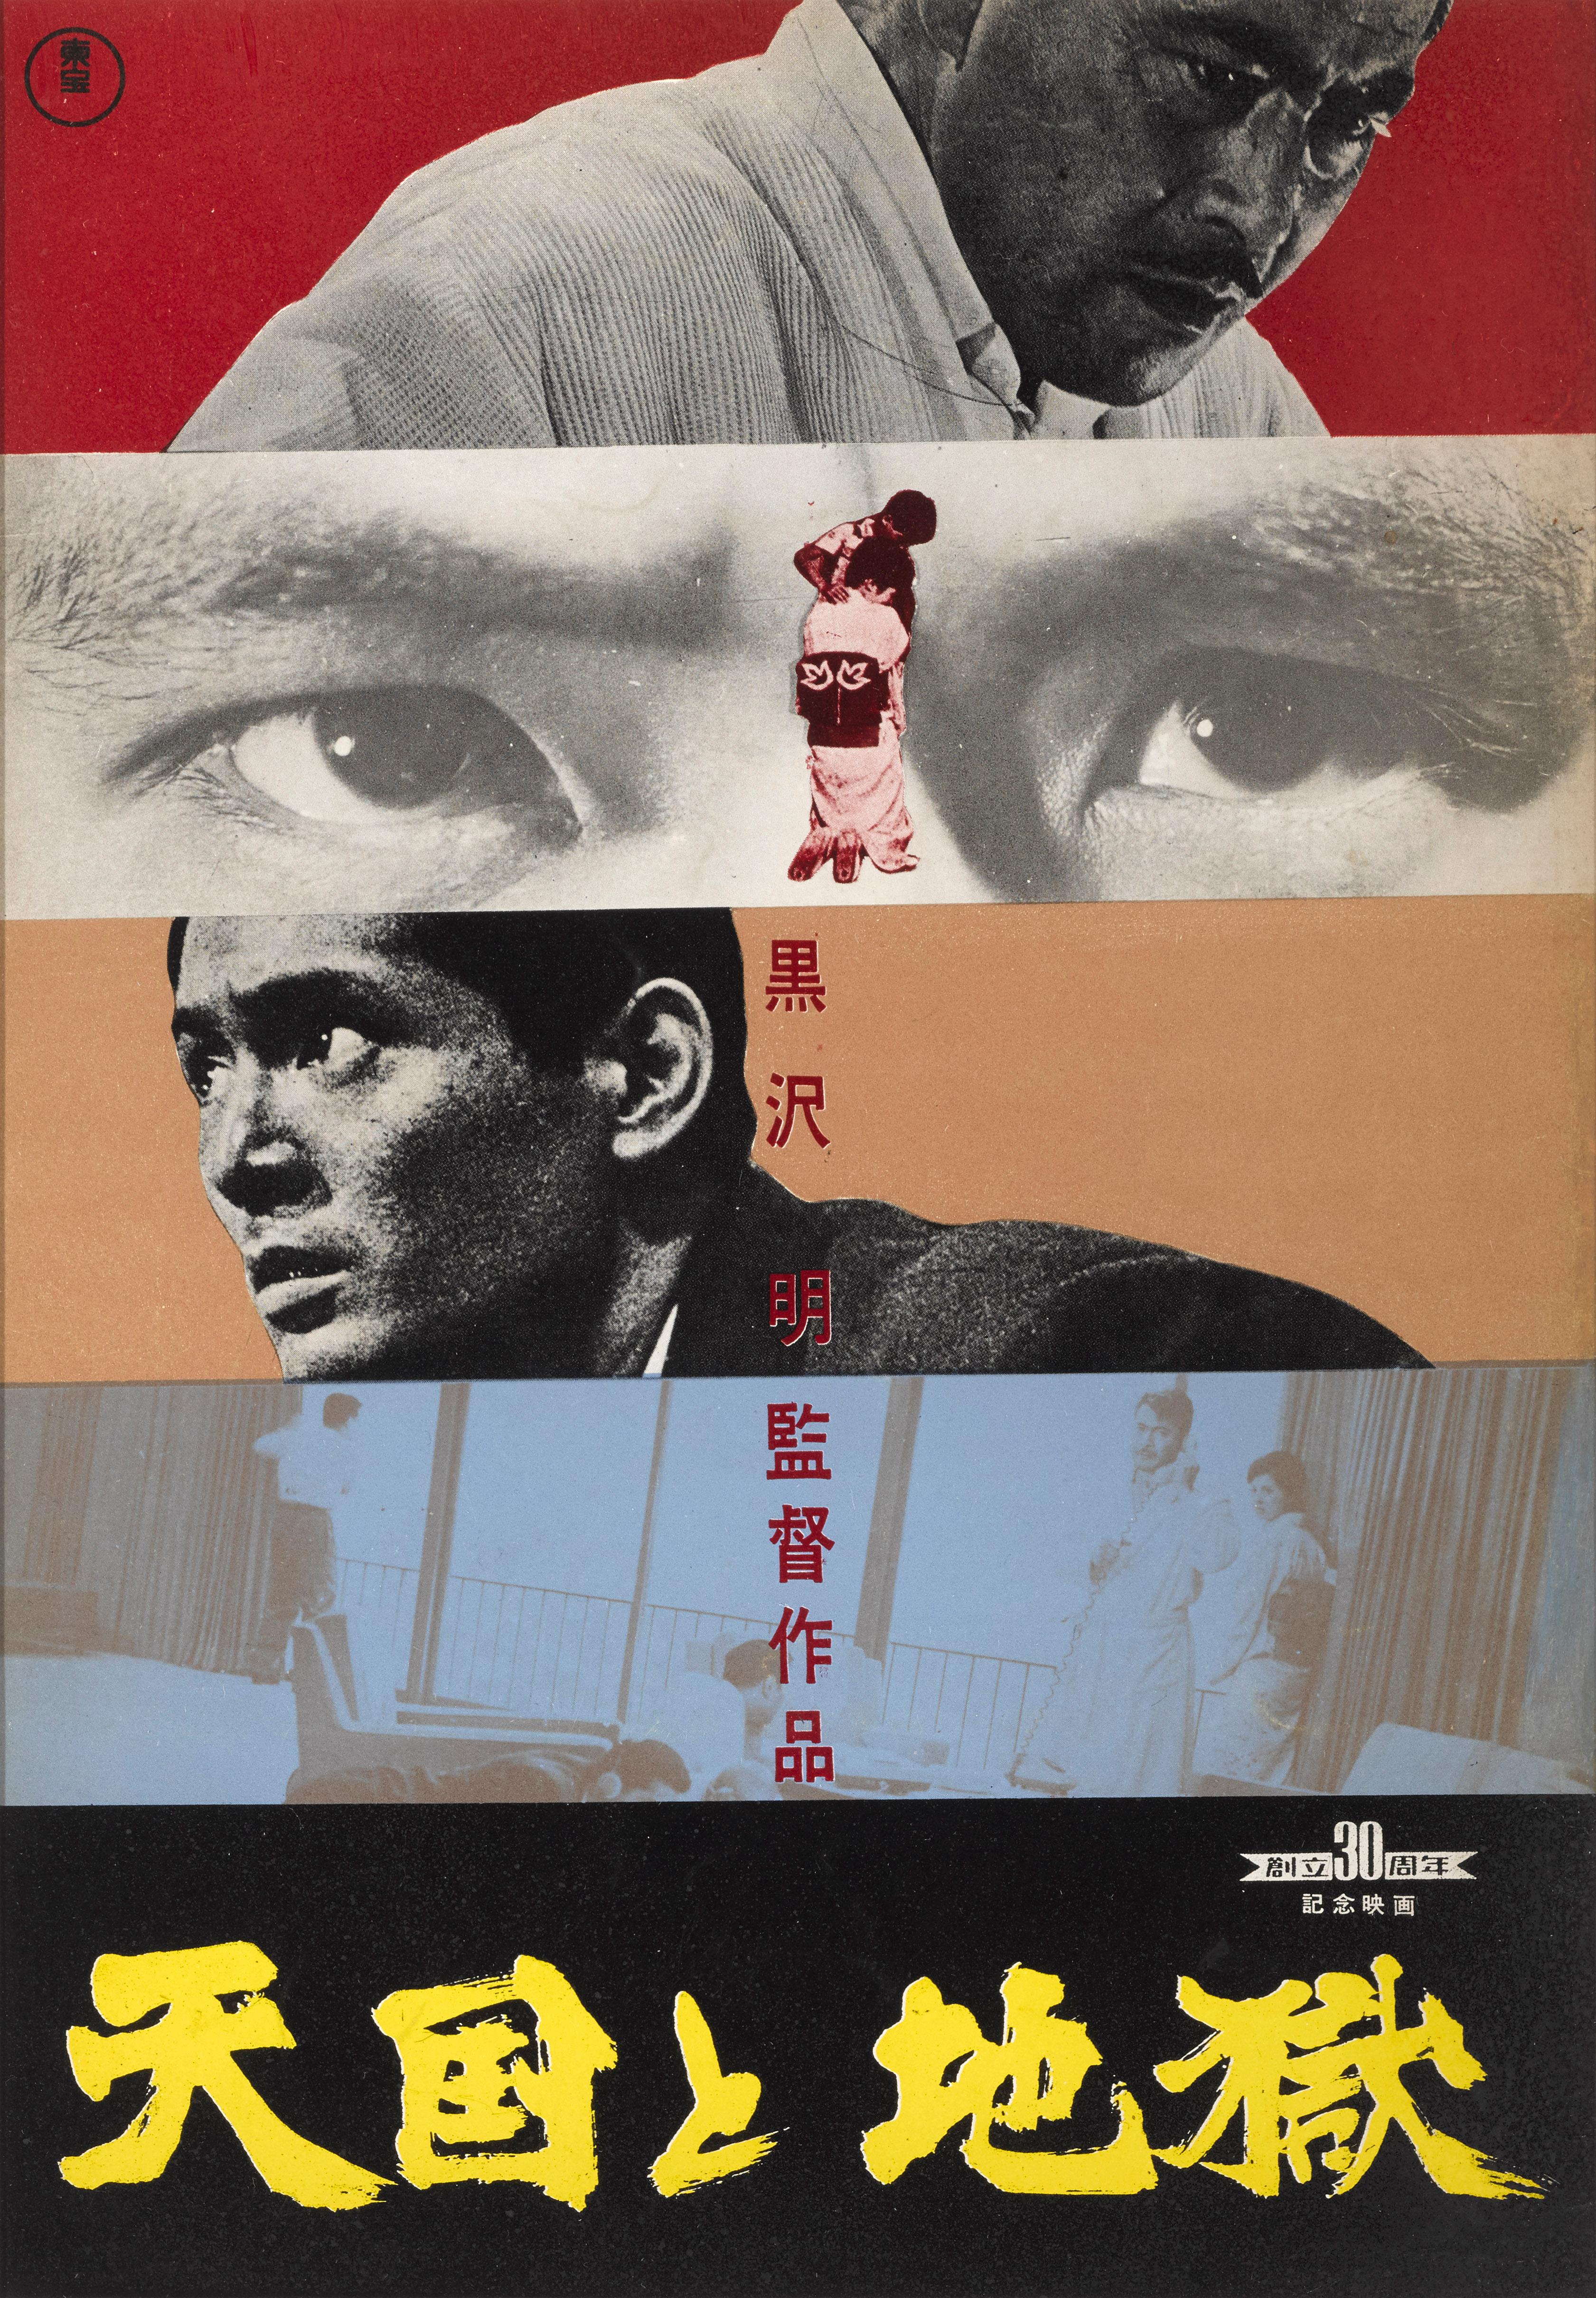 Original Japanese program cover for Akira Kurosawa 1963 crime drama.
This film starred Toshiro Mifune and Takashi Shimura.
This piece is unfolded and conservation paper backed 
It is also conservation framed with UV plexiglass in a Tulip wood